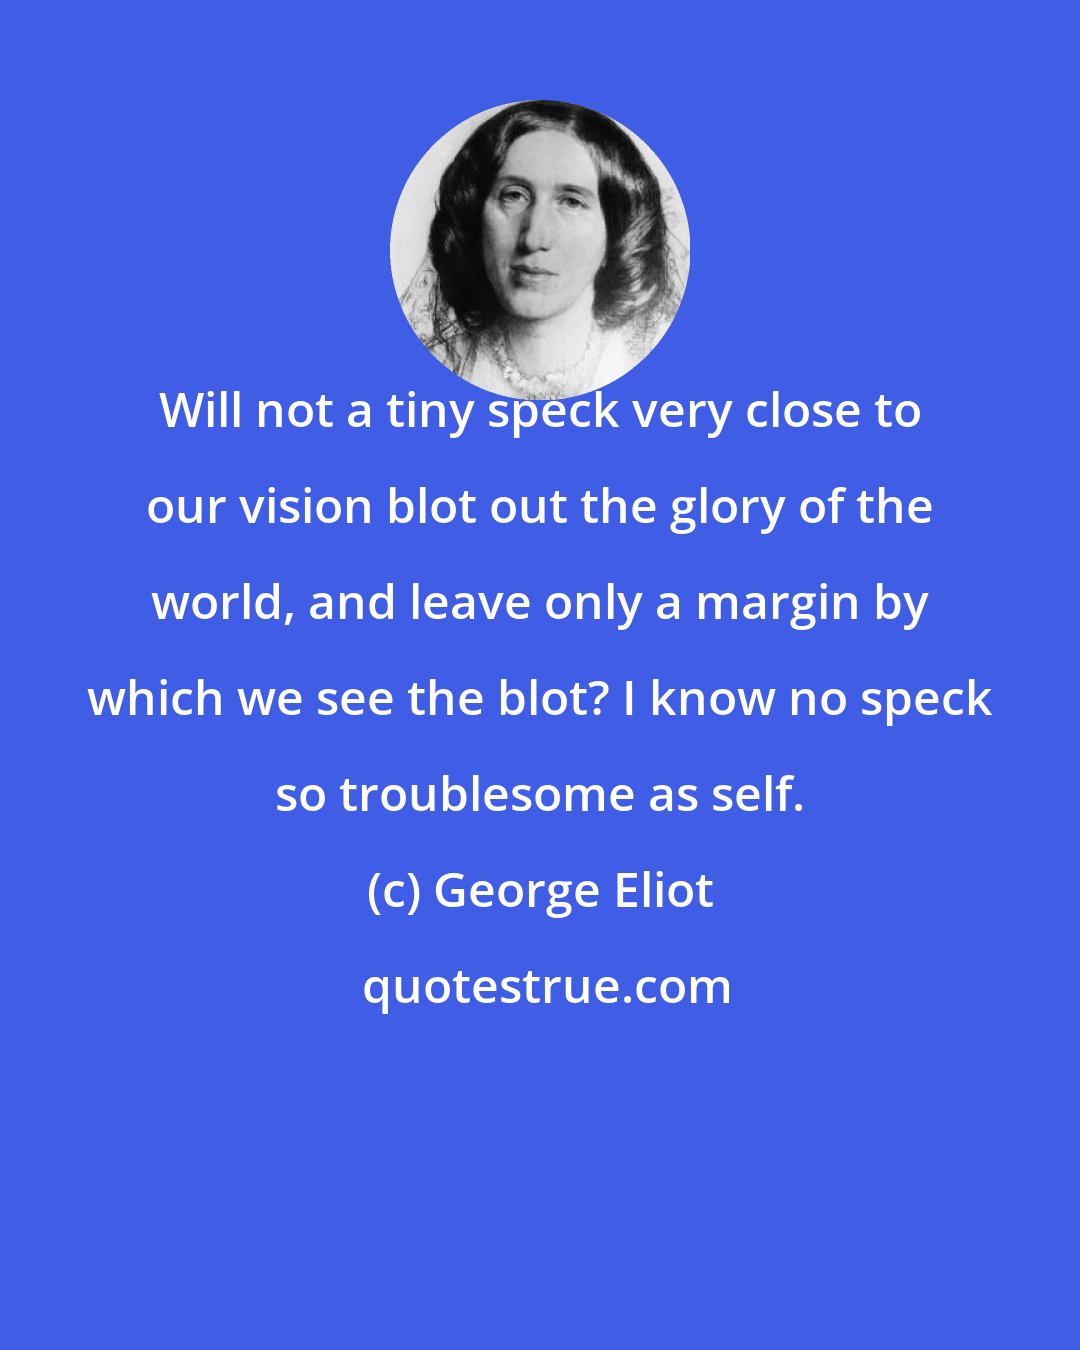 George Eliot: Will not a tiny speck very close to our vision blot out the glory of the world, and leave only a margin by which we see the blot? I know no speck so troublesome as self.